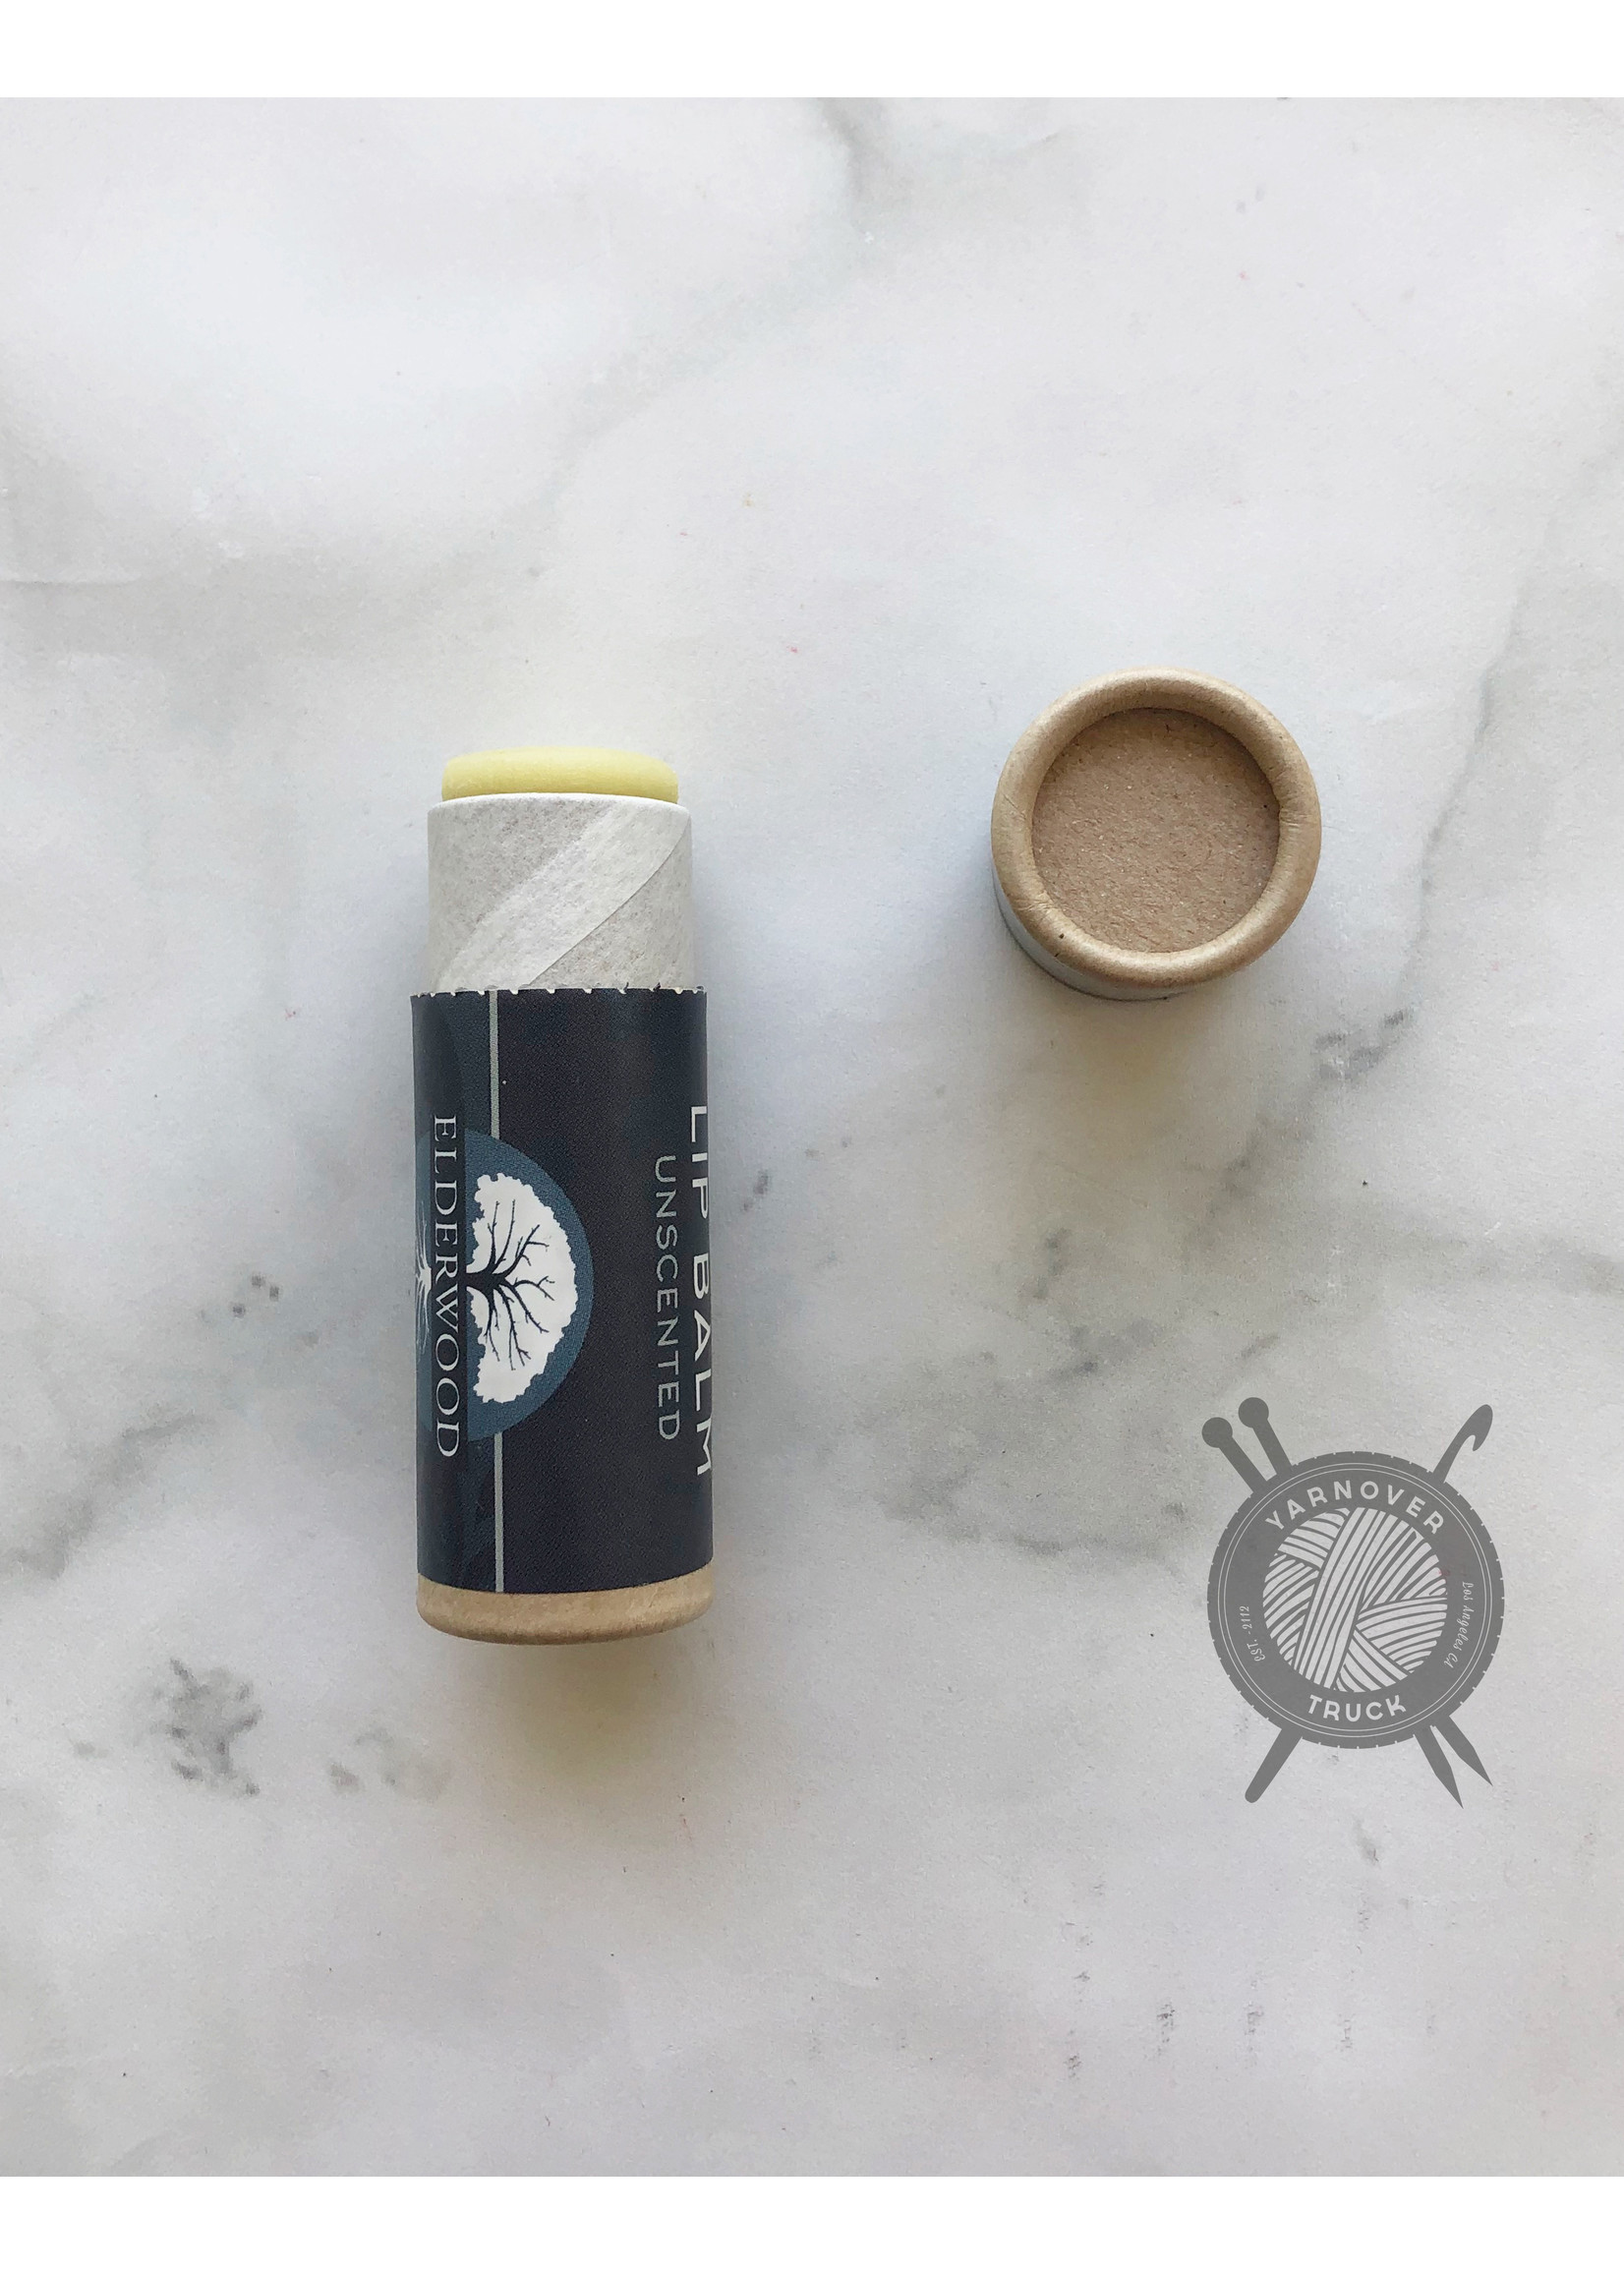 Elderwood Apothecary Unscented Lip Balm from Elderwood Apothecary